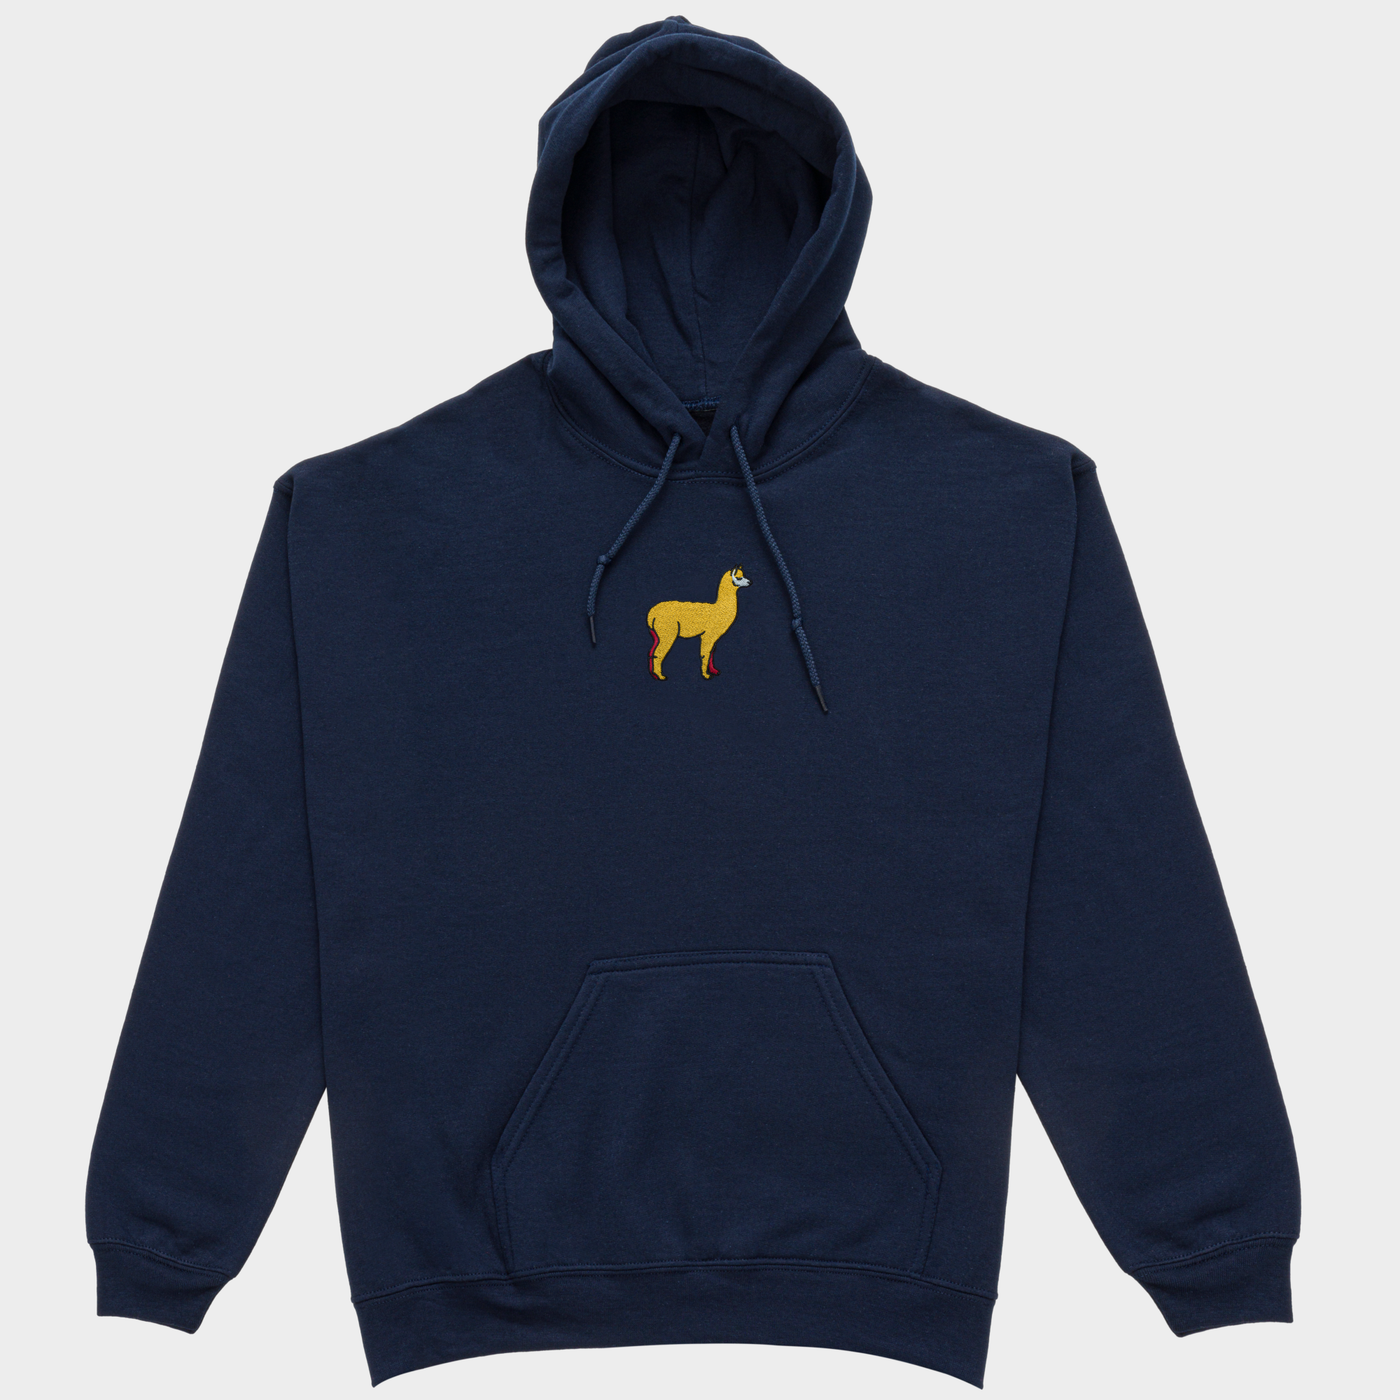 Bobby's Planet Men's Embroidered Alpaca Hoodie from South American Amazon Animals Collection in Navy Color#color_navy